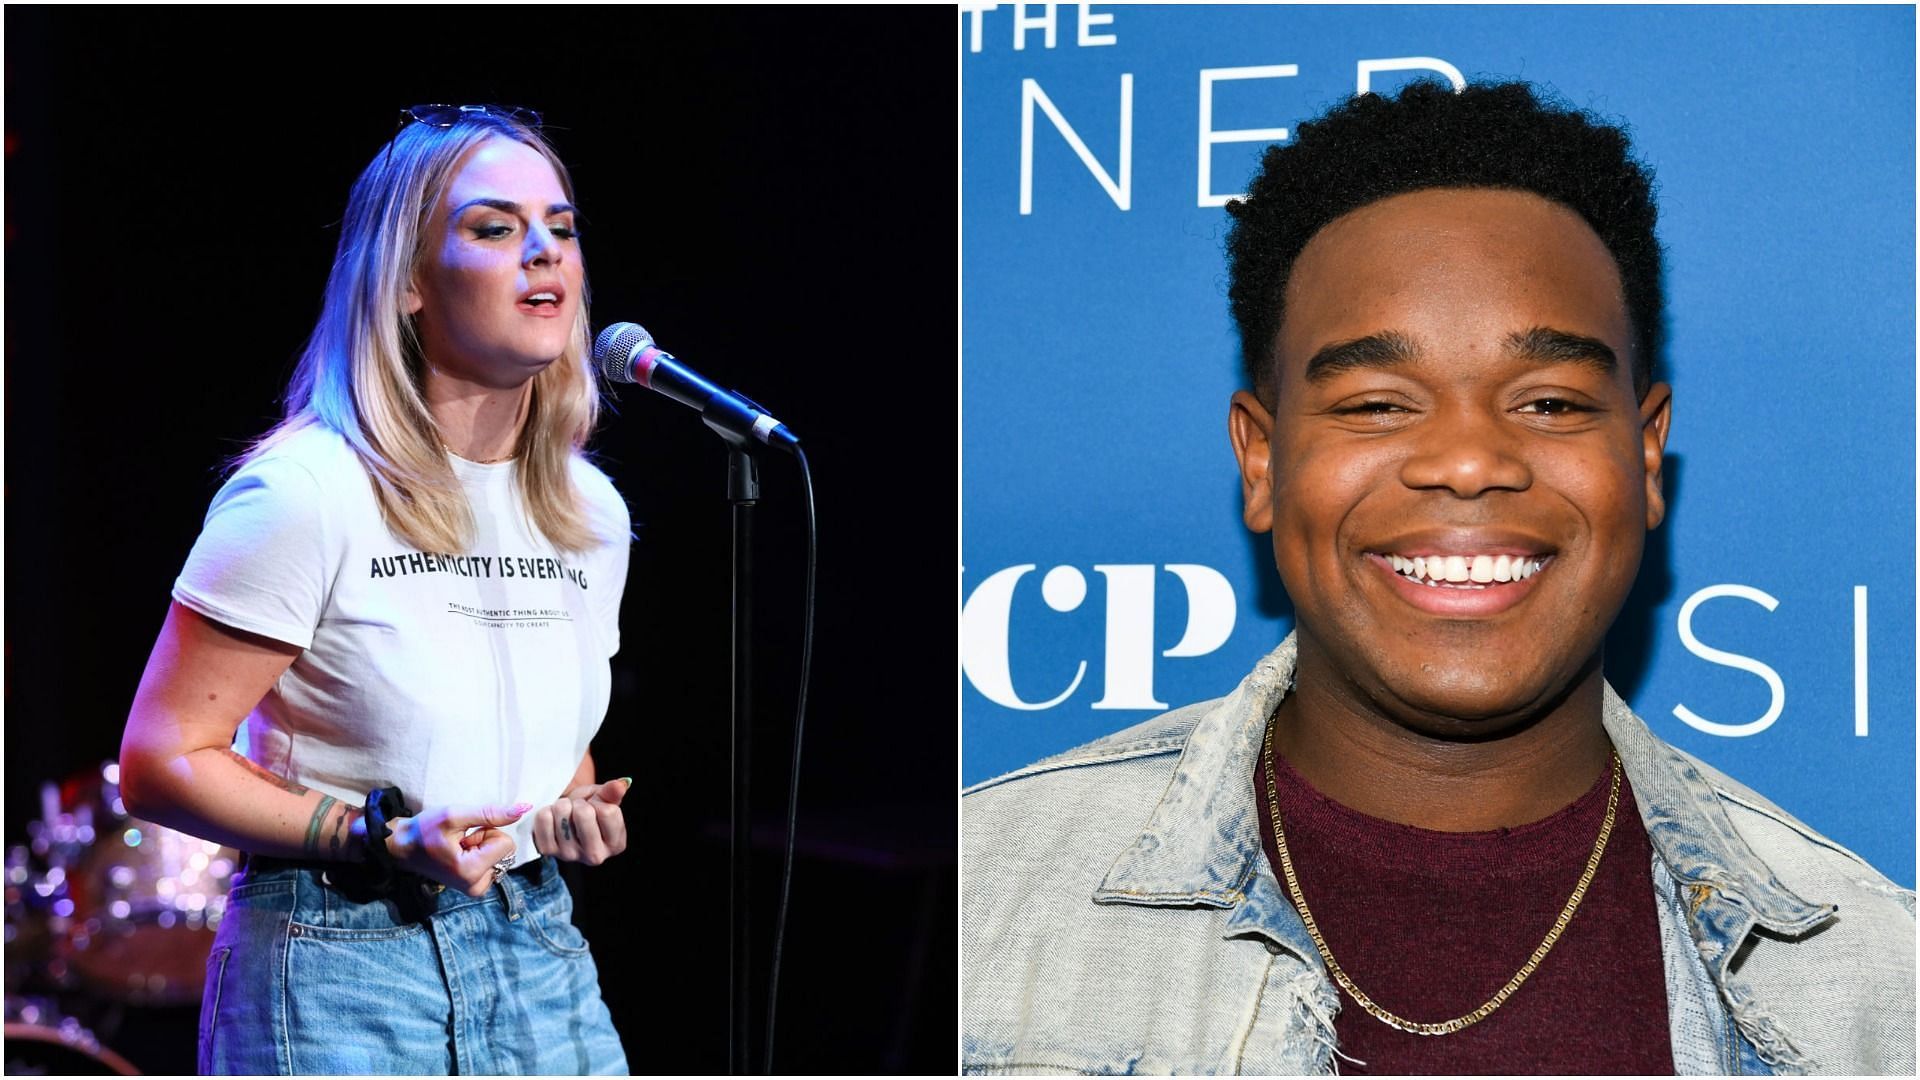 Dexter Darden paid tribute to JoJo on his birthday (Images by Rebecca Sapp and Rodin Eckenroth via Getty Images)